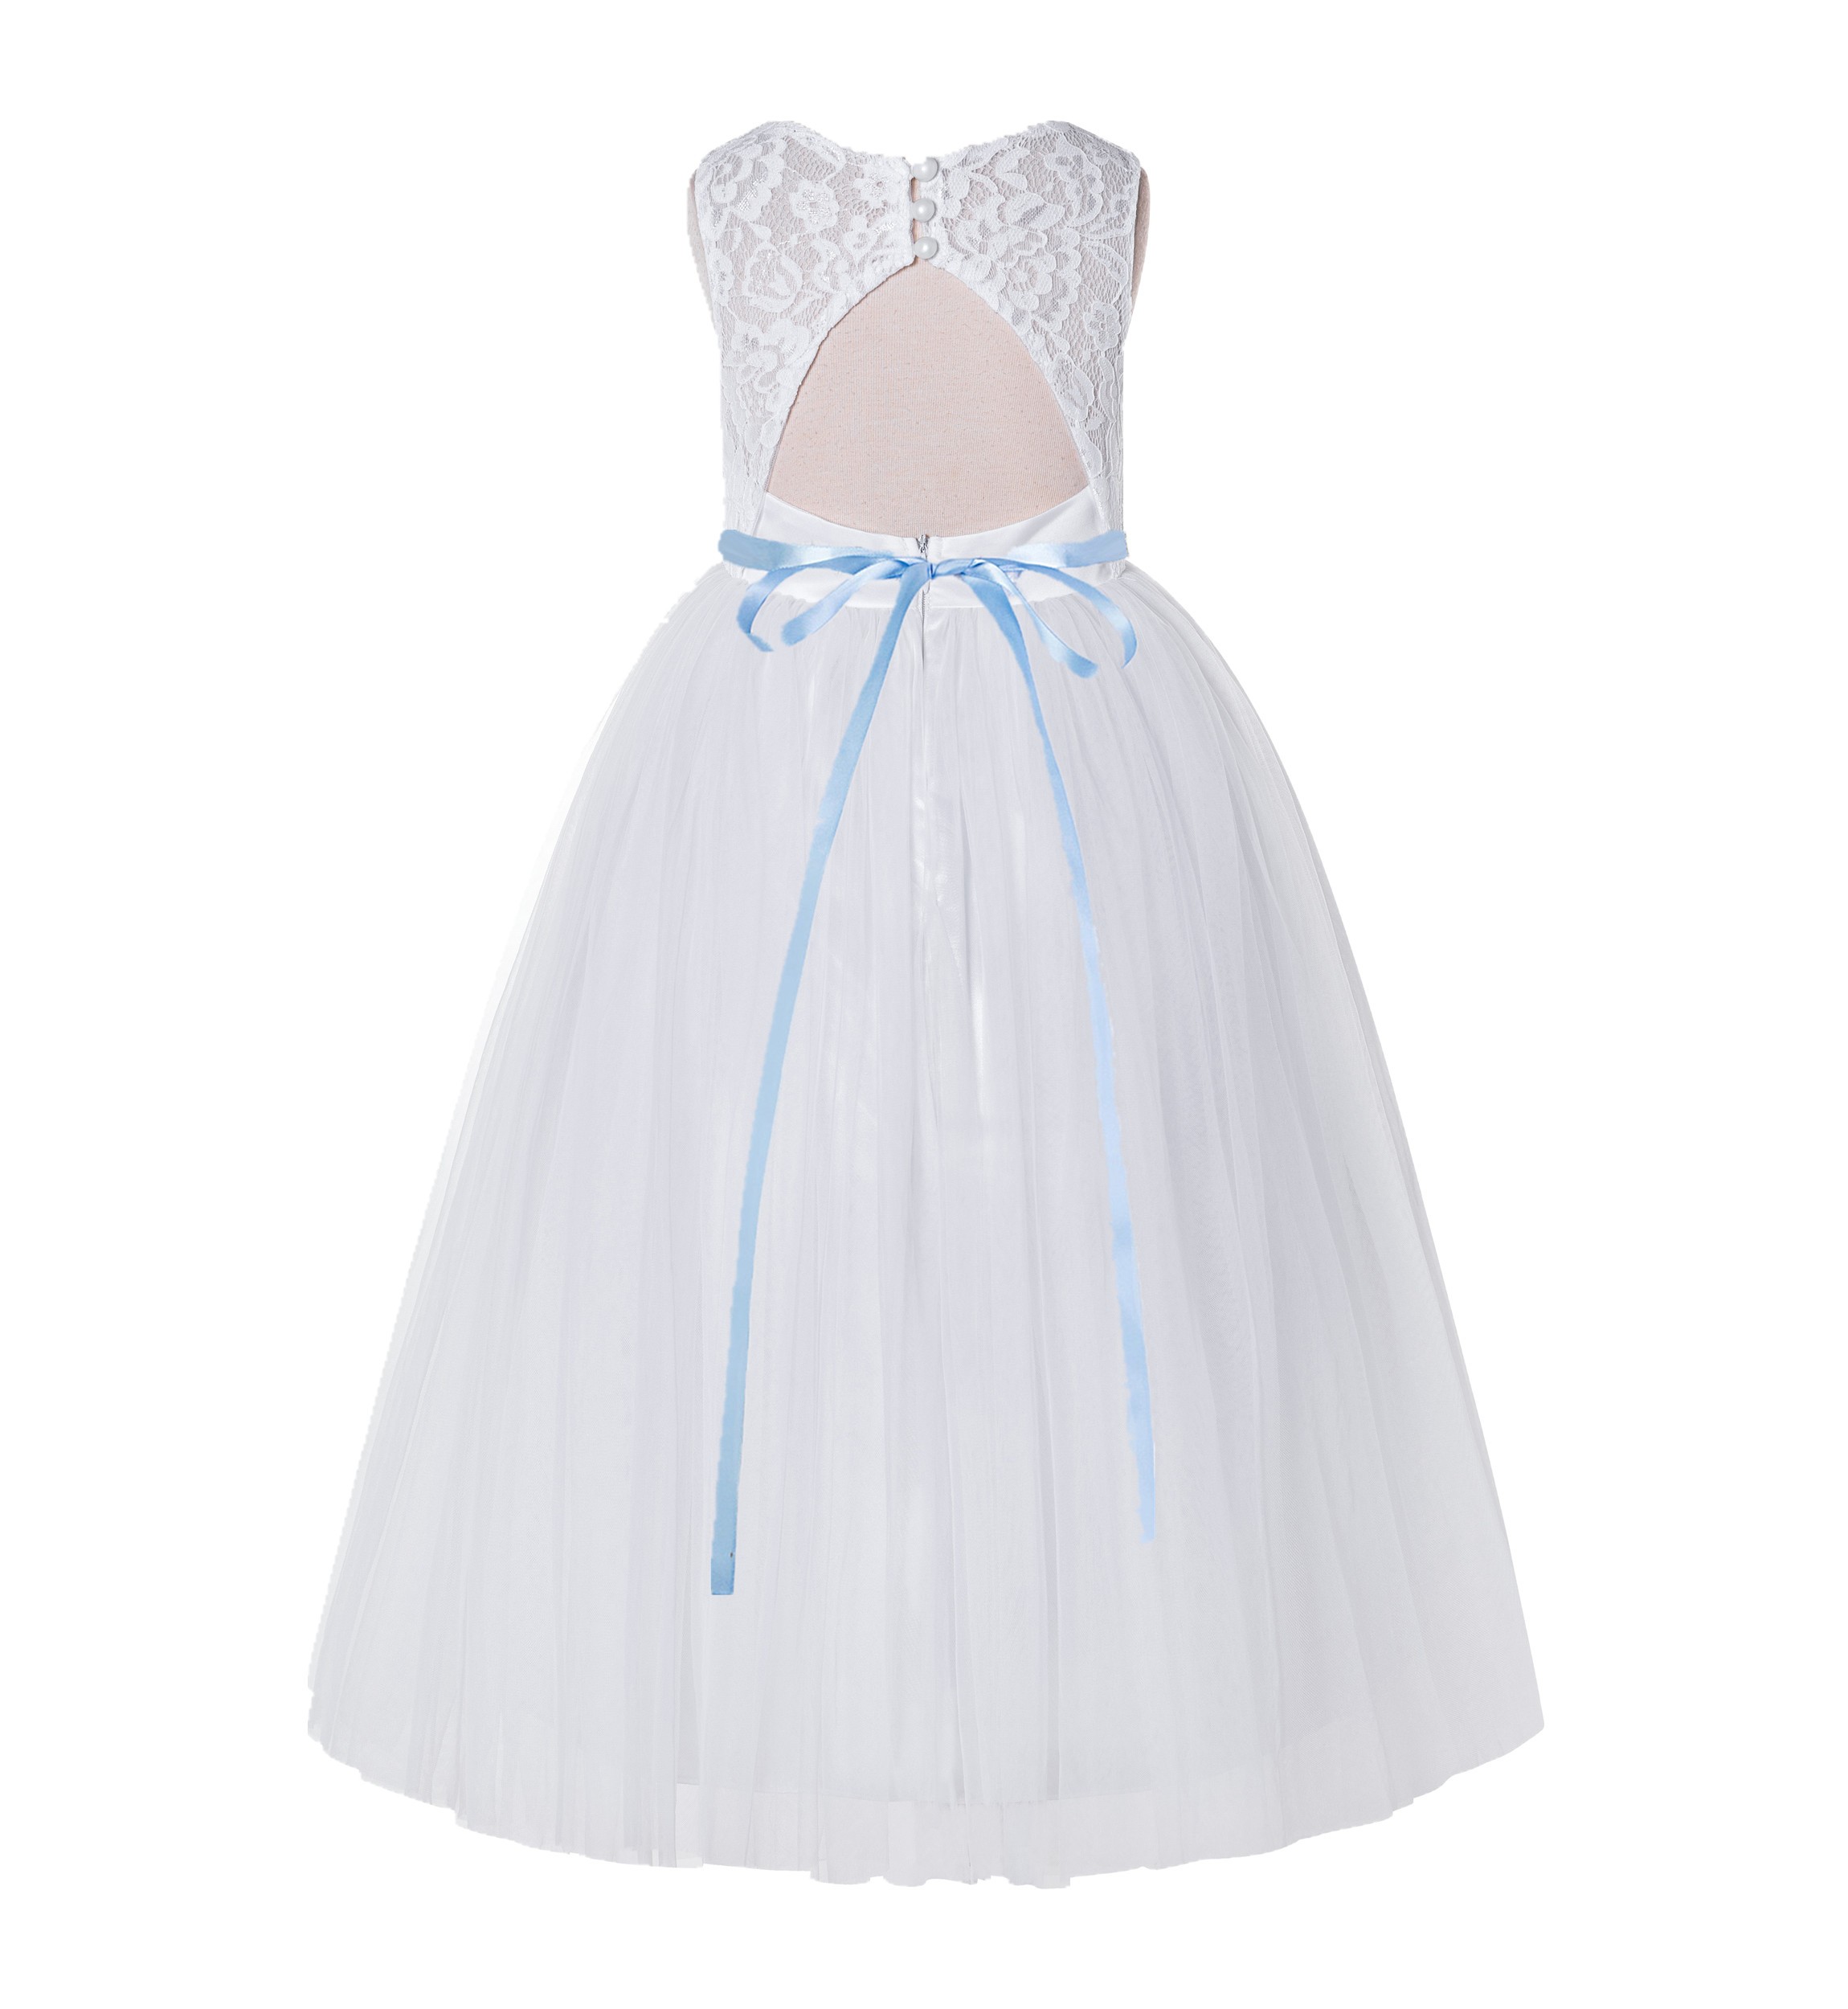 White / Dusty Blue A-Line Tulle Lace Flower Girl Dress 178R4